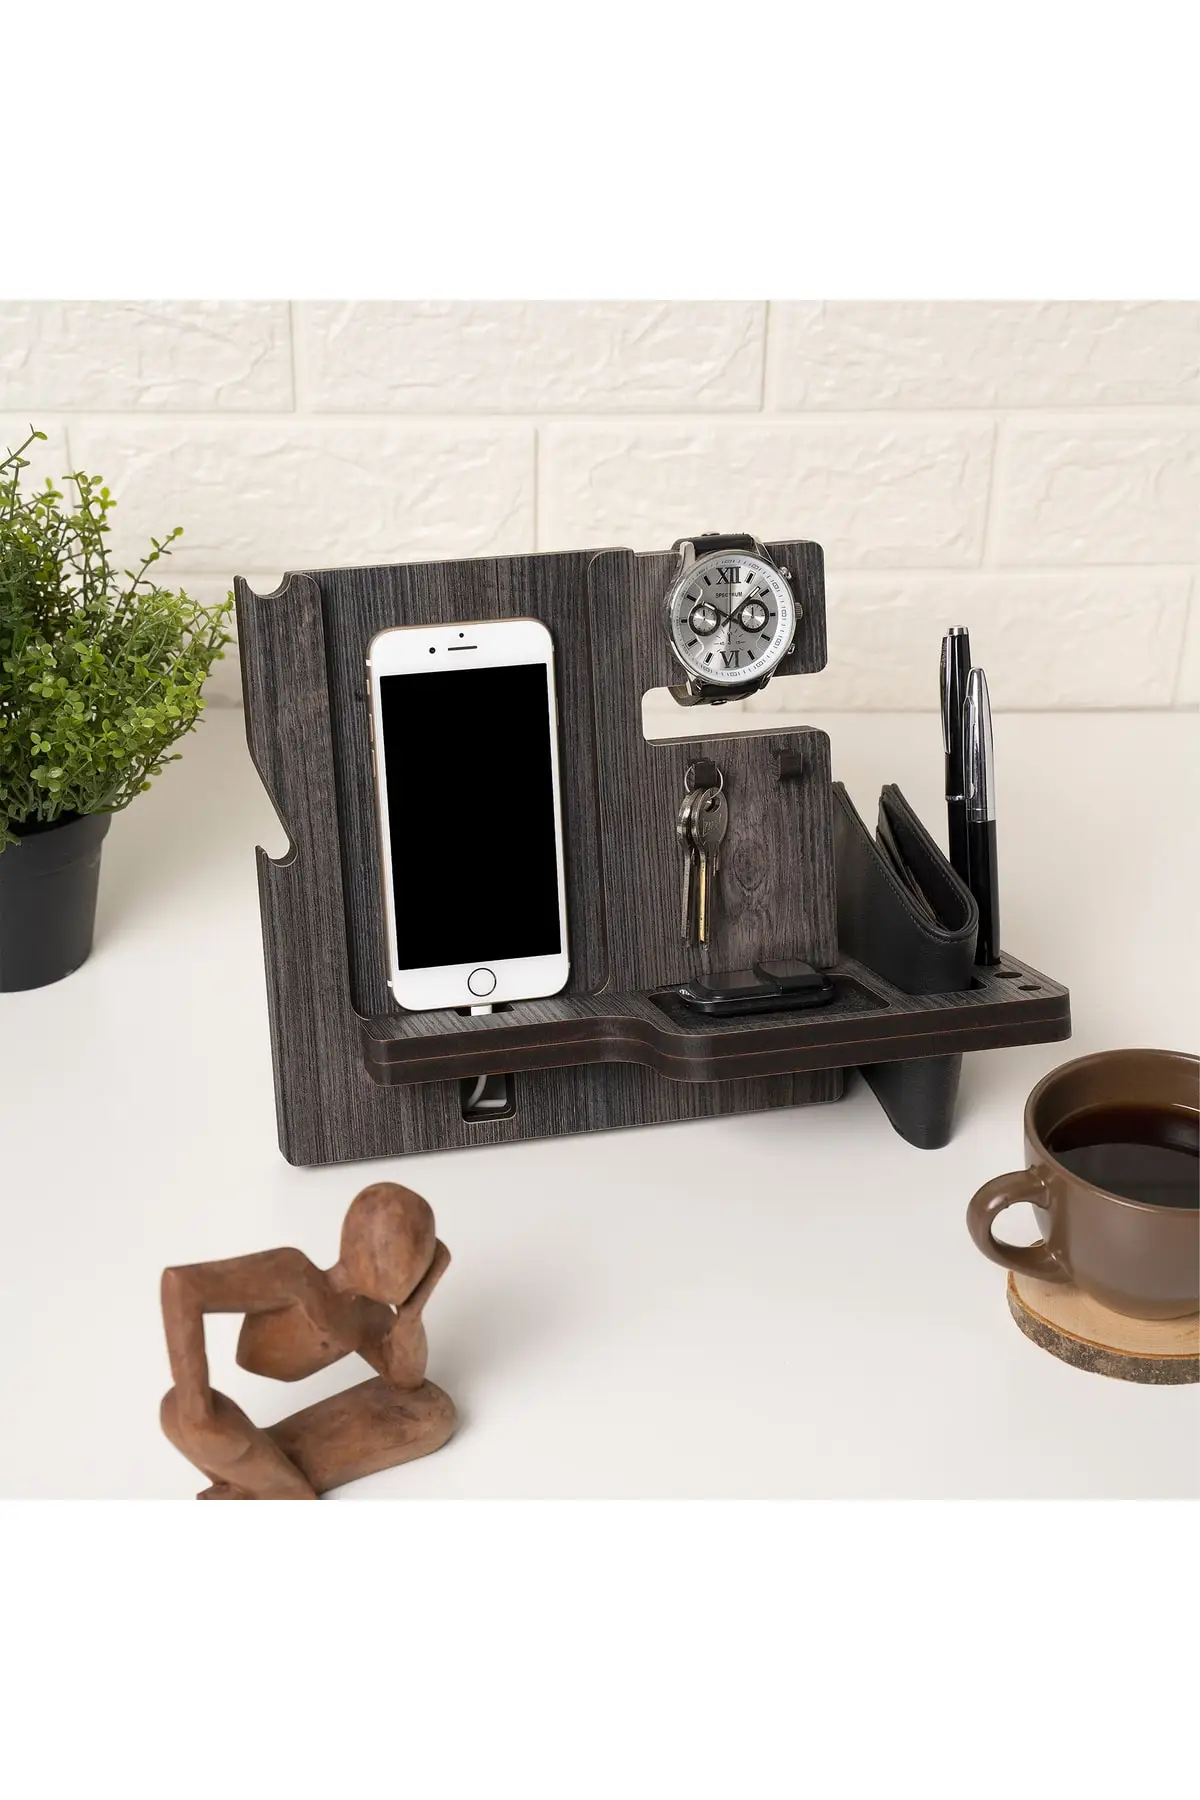 Wooden Phone Stand Clock Wallet Stand Desktop Organizer Charging Stand Accessory Stand Md06a